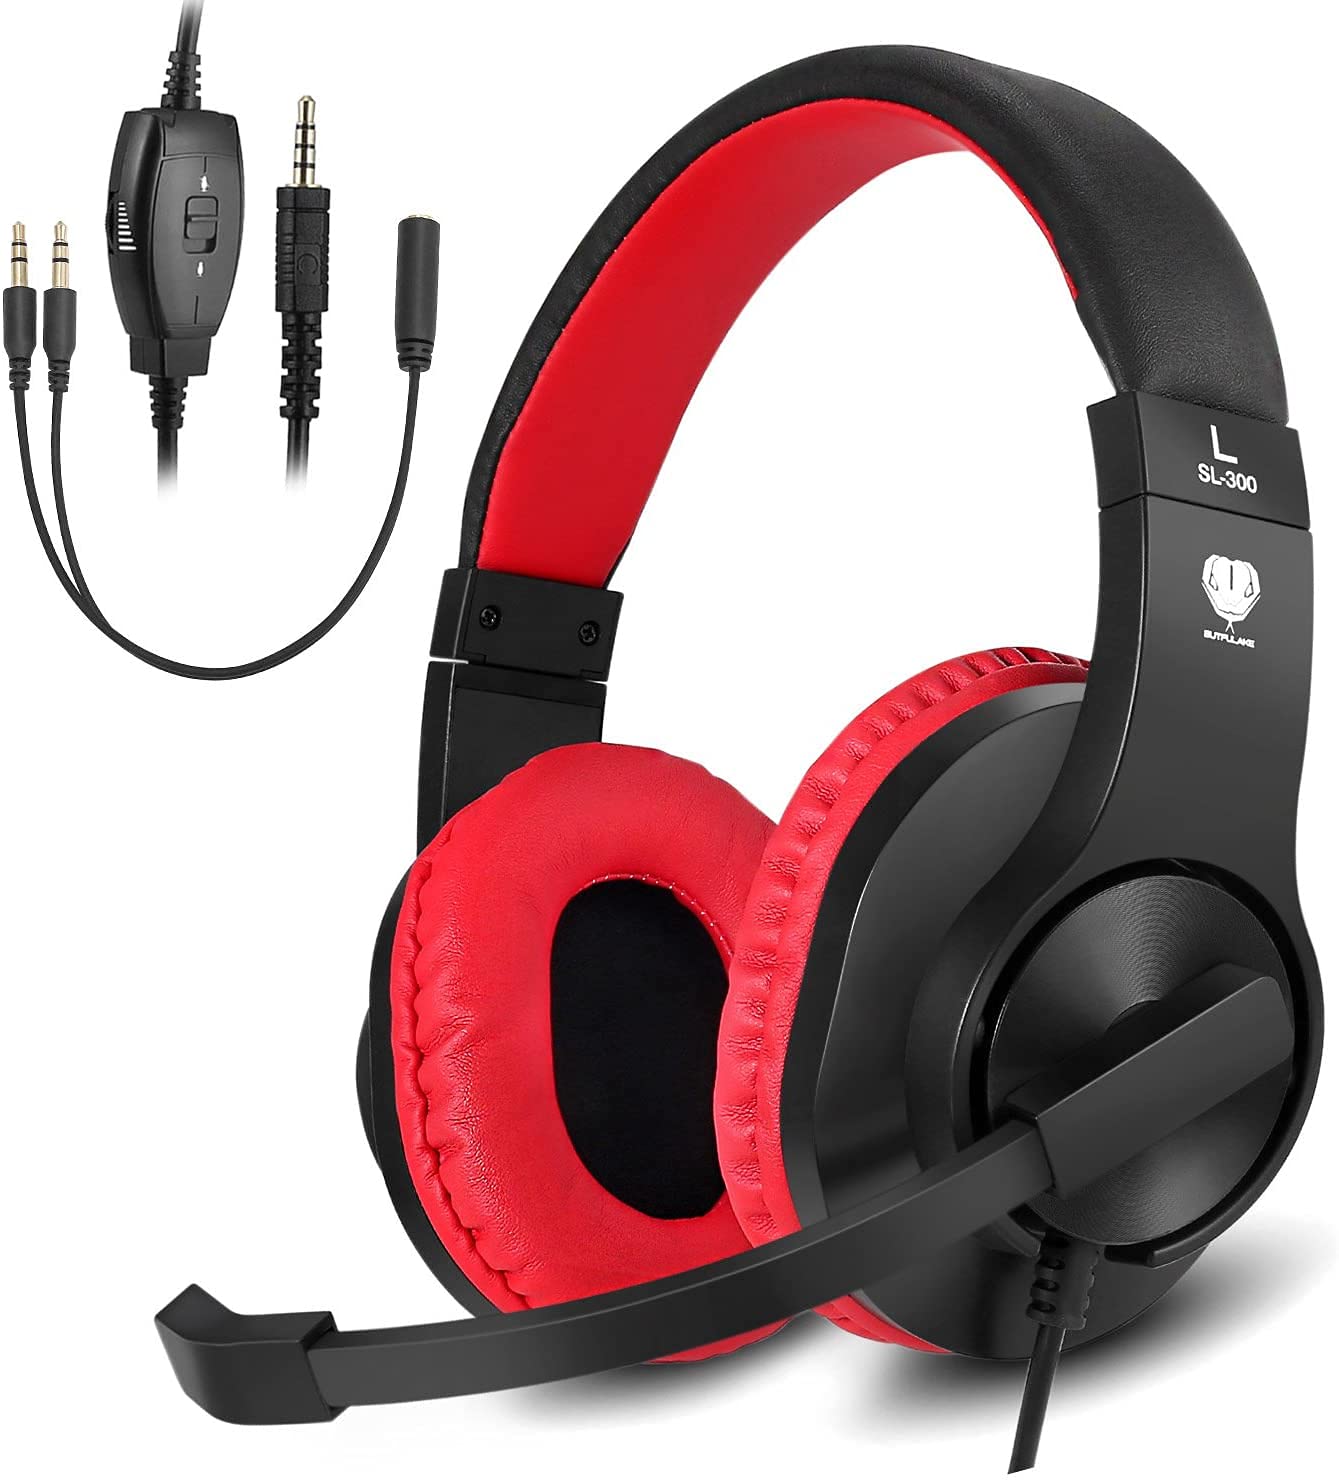 BUTFULAKE Stereo Gaming Headset for PS4, Xbox One, Nintendo Switch, Adjustable Earmuffs and Over-All Noise Isolation, Lightweight 3.5mm Wired Volume Control with Mic for Laptop PC (Black-red)